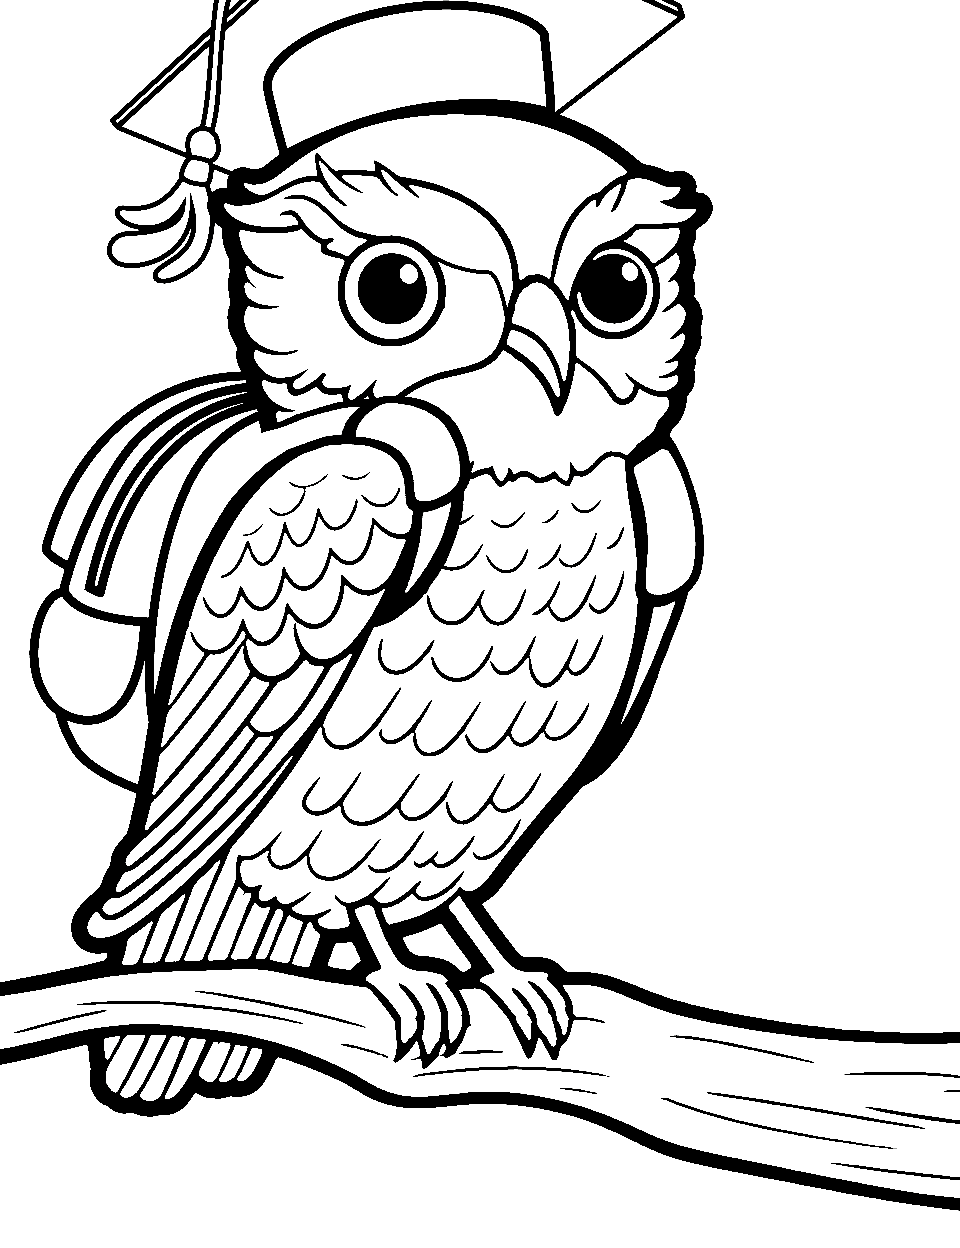 Owl Going to School Coloring Page - An owl with a backpack, ready for school.